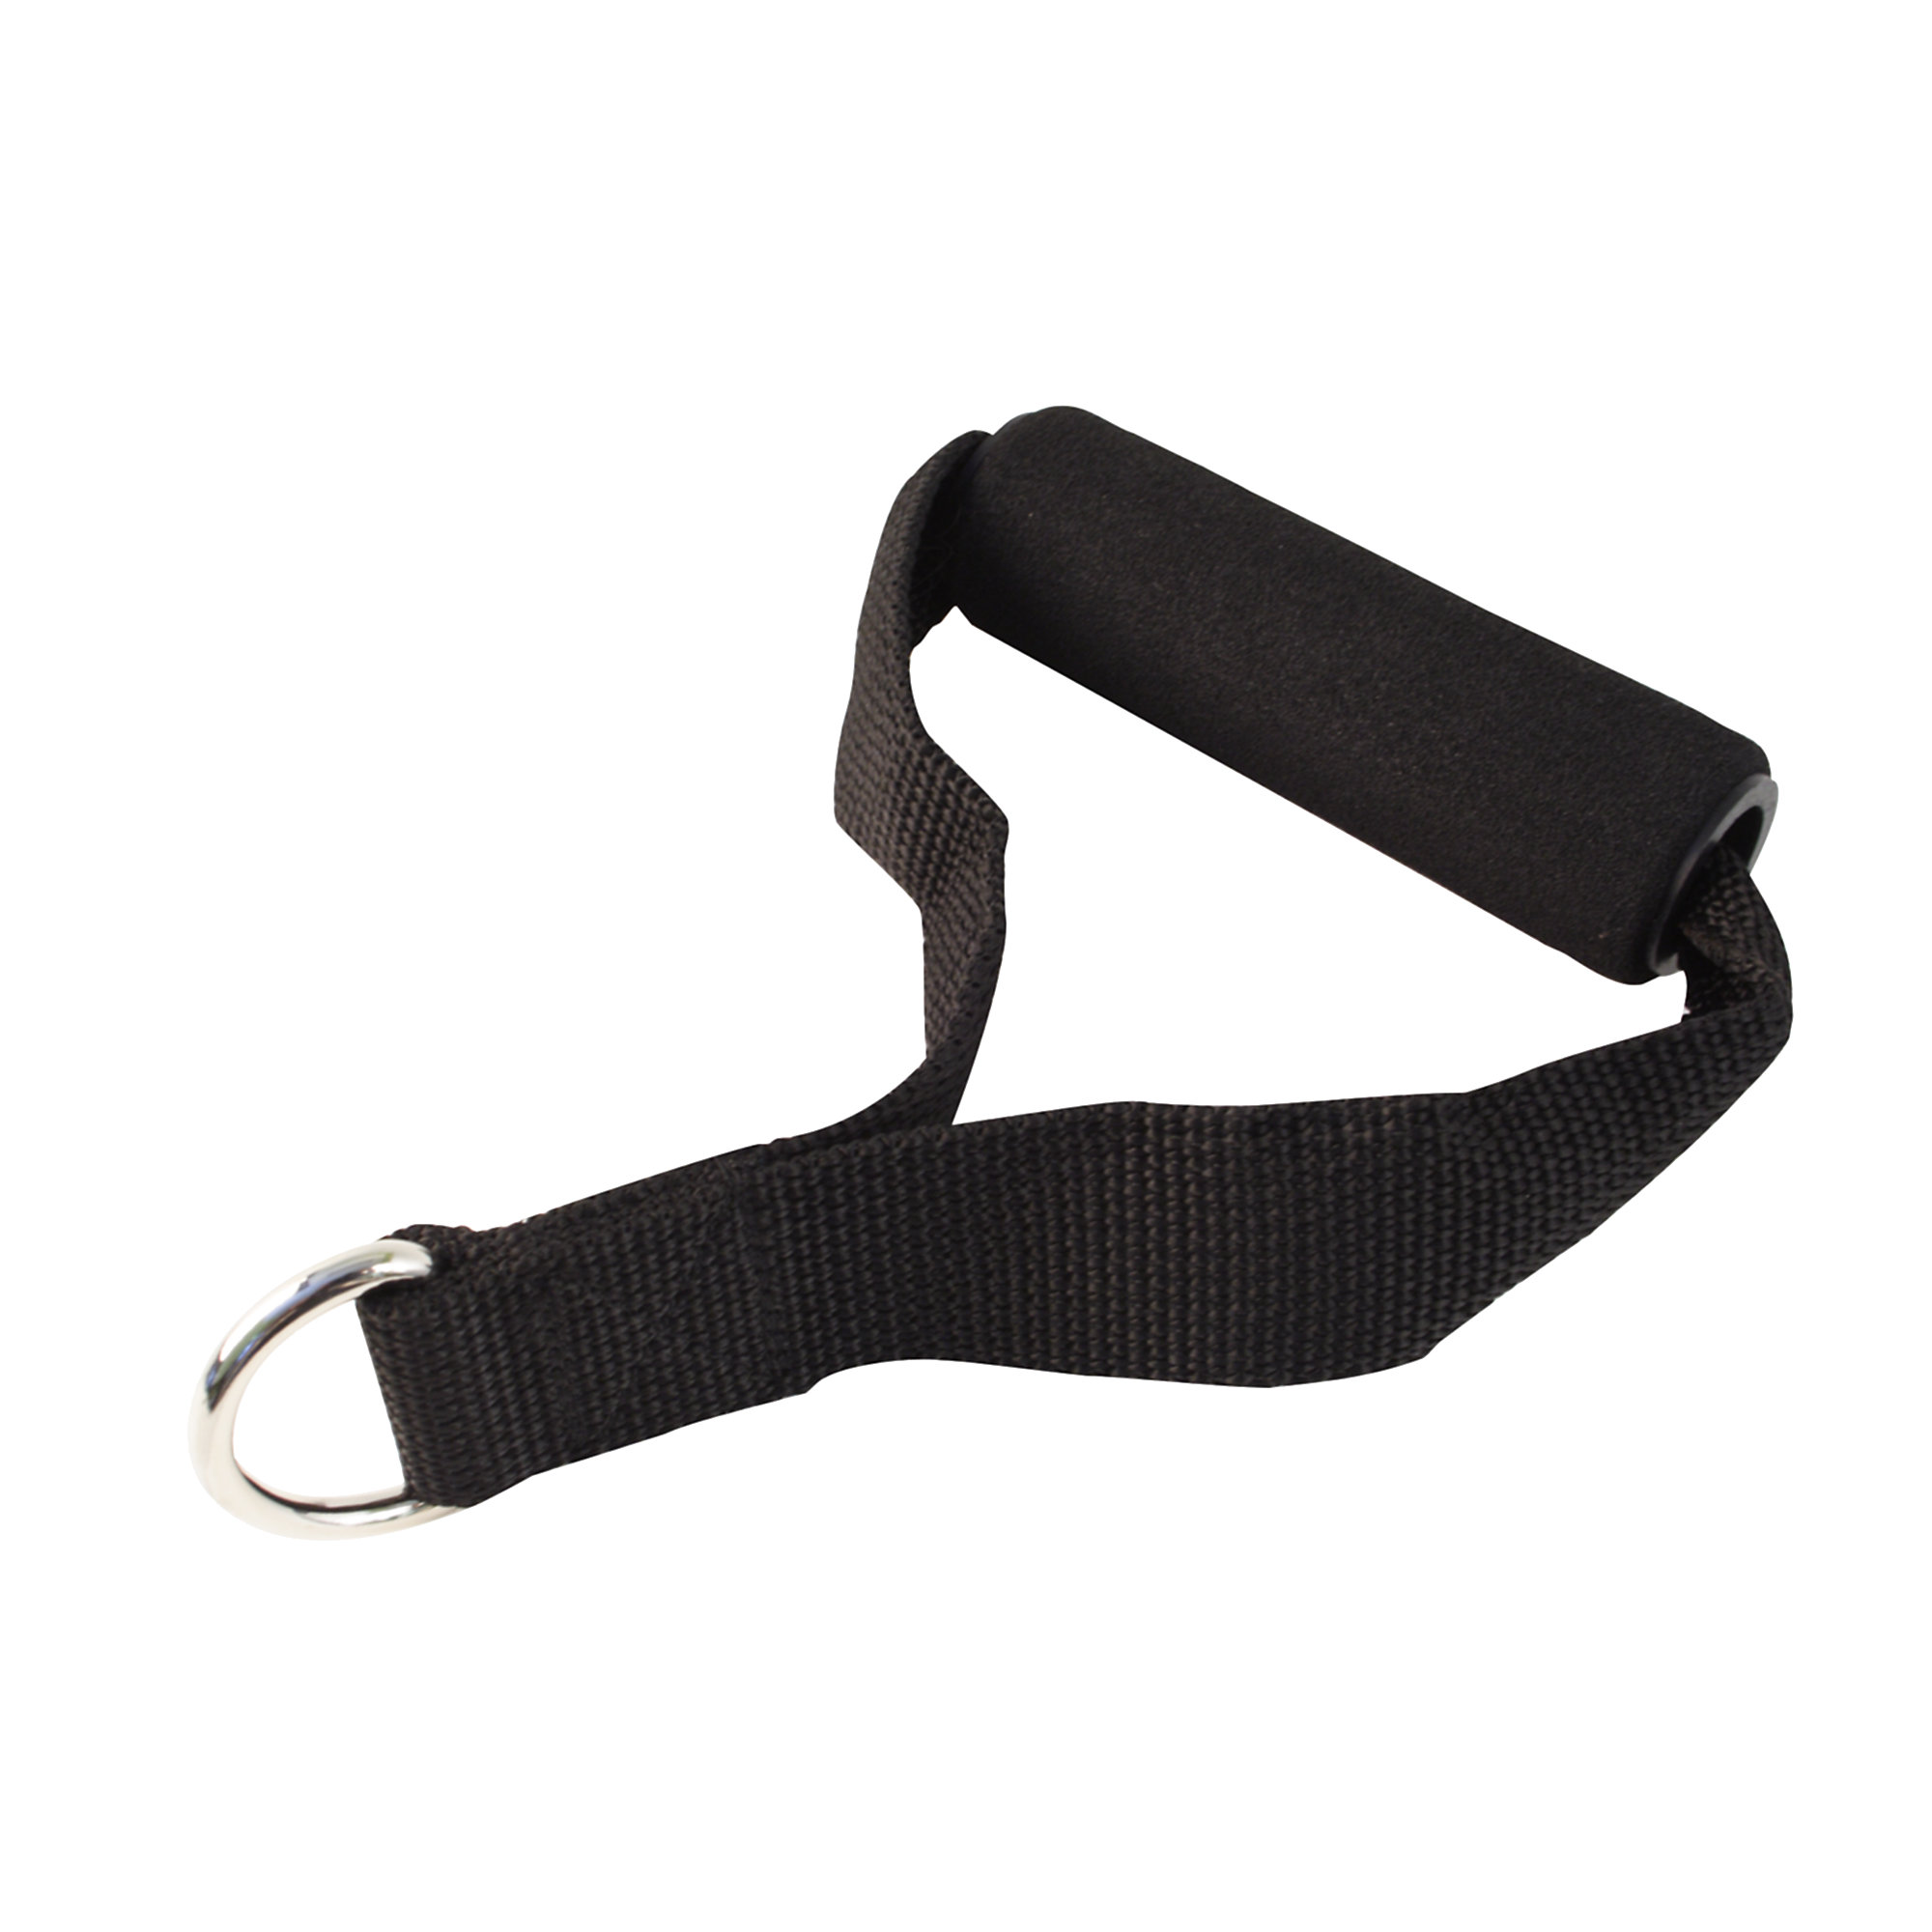 Nylon Strap with Foam-Grip Handle and D-Ring